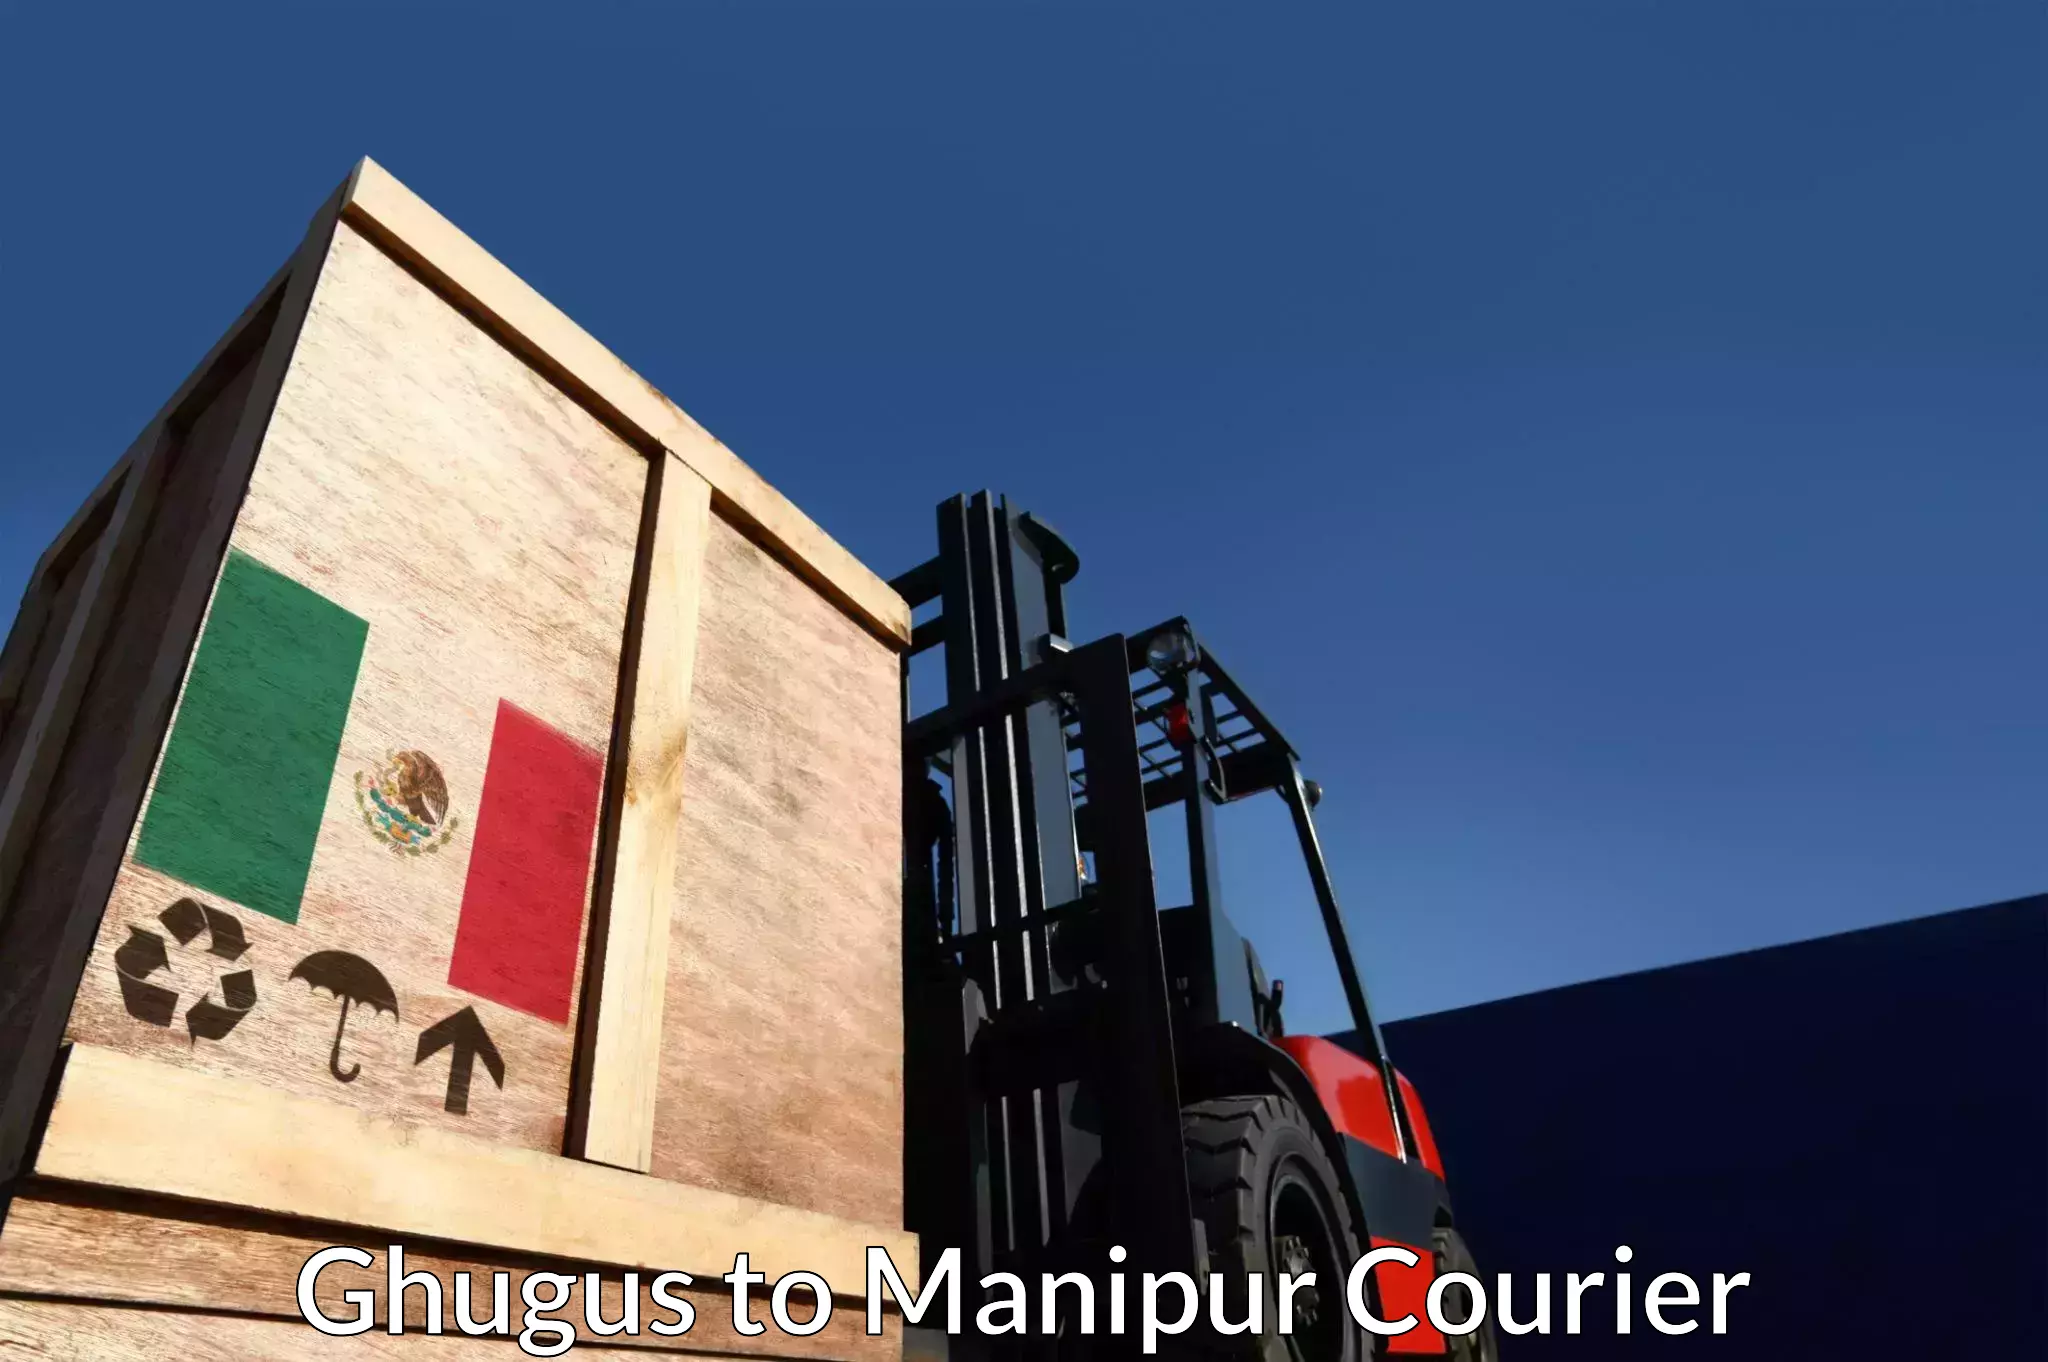 Next-day delivery options in Ghugus to Manipur